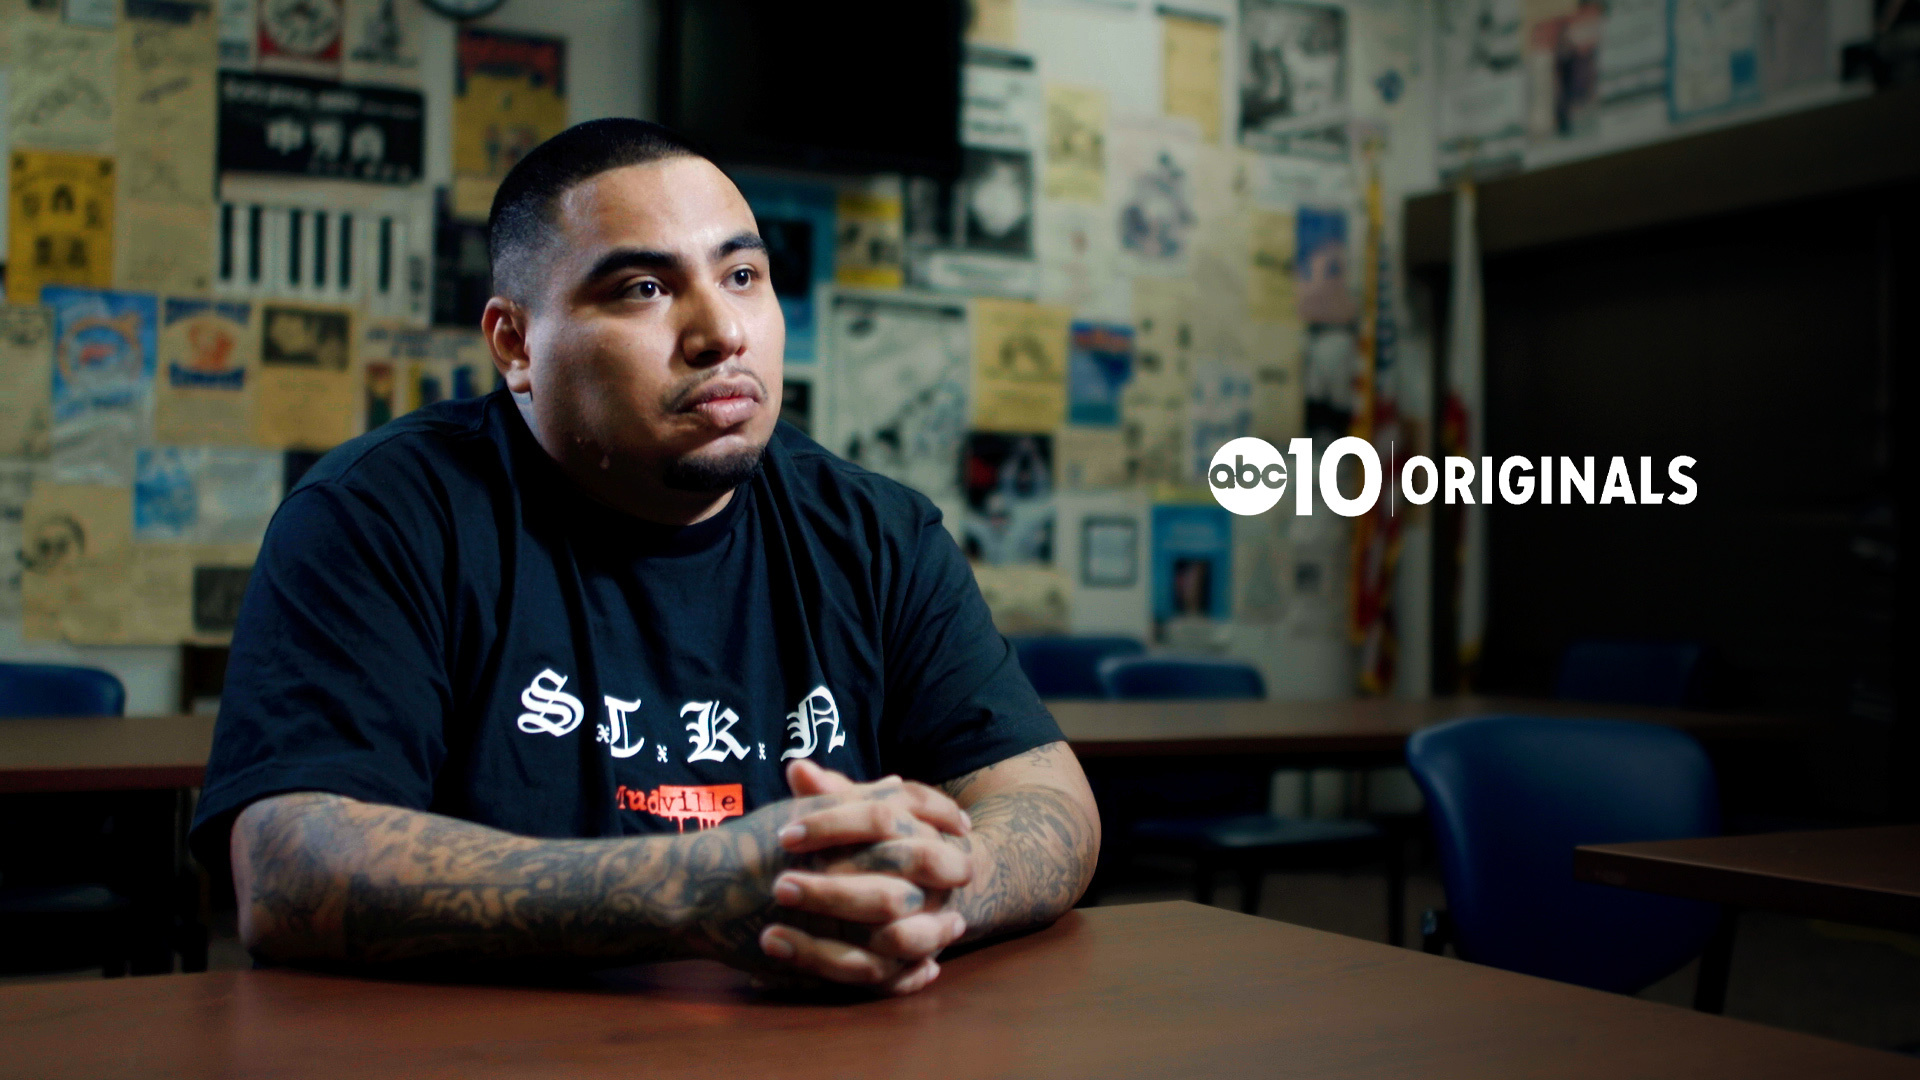 A former Stockton gang member talks candidly about why he joined a gang, and why being shot 15 times in one incident wasn't enough to get him to quit. In this extended interview, Efrain Padilla shares with Michael Anthony Adams what the turning point finally was in terms of giving up the gang lifestyle, and what has helped him stay out.